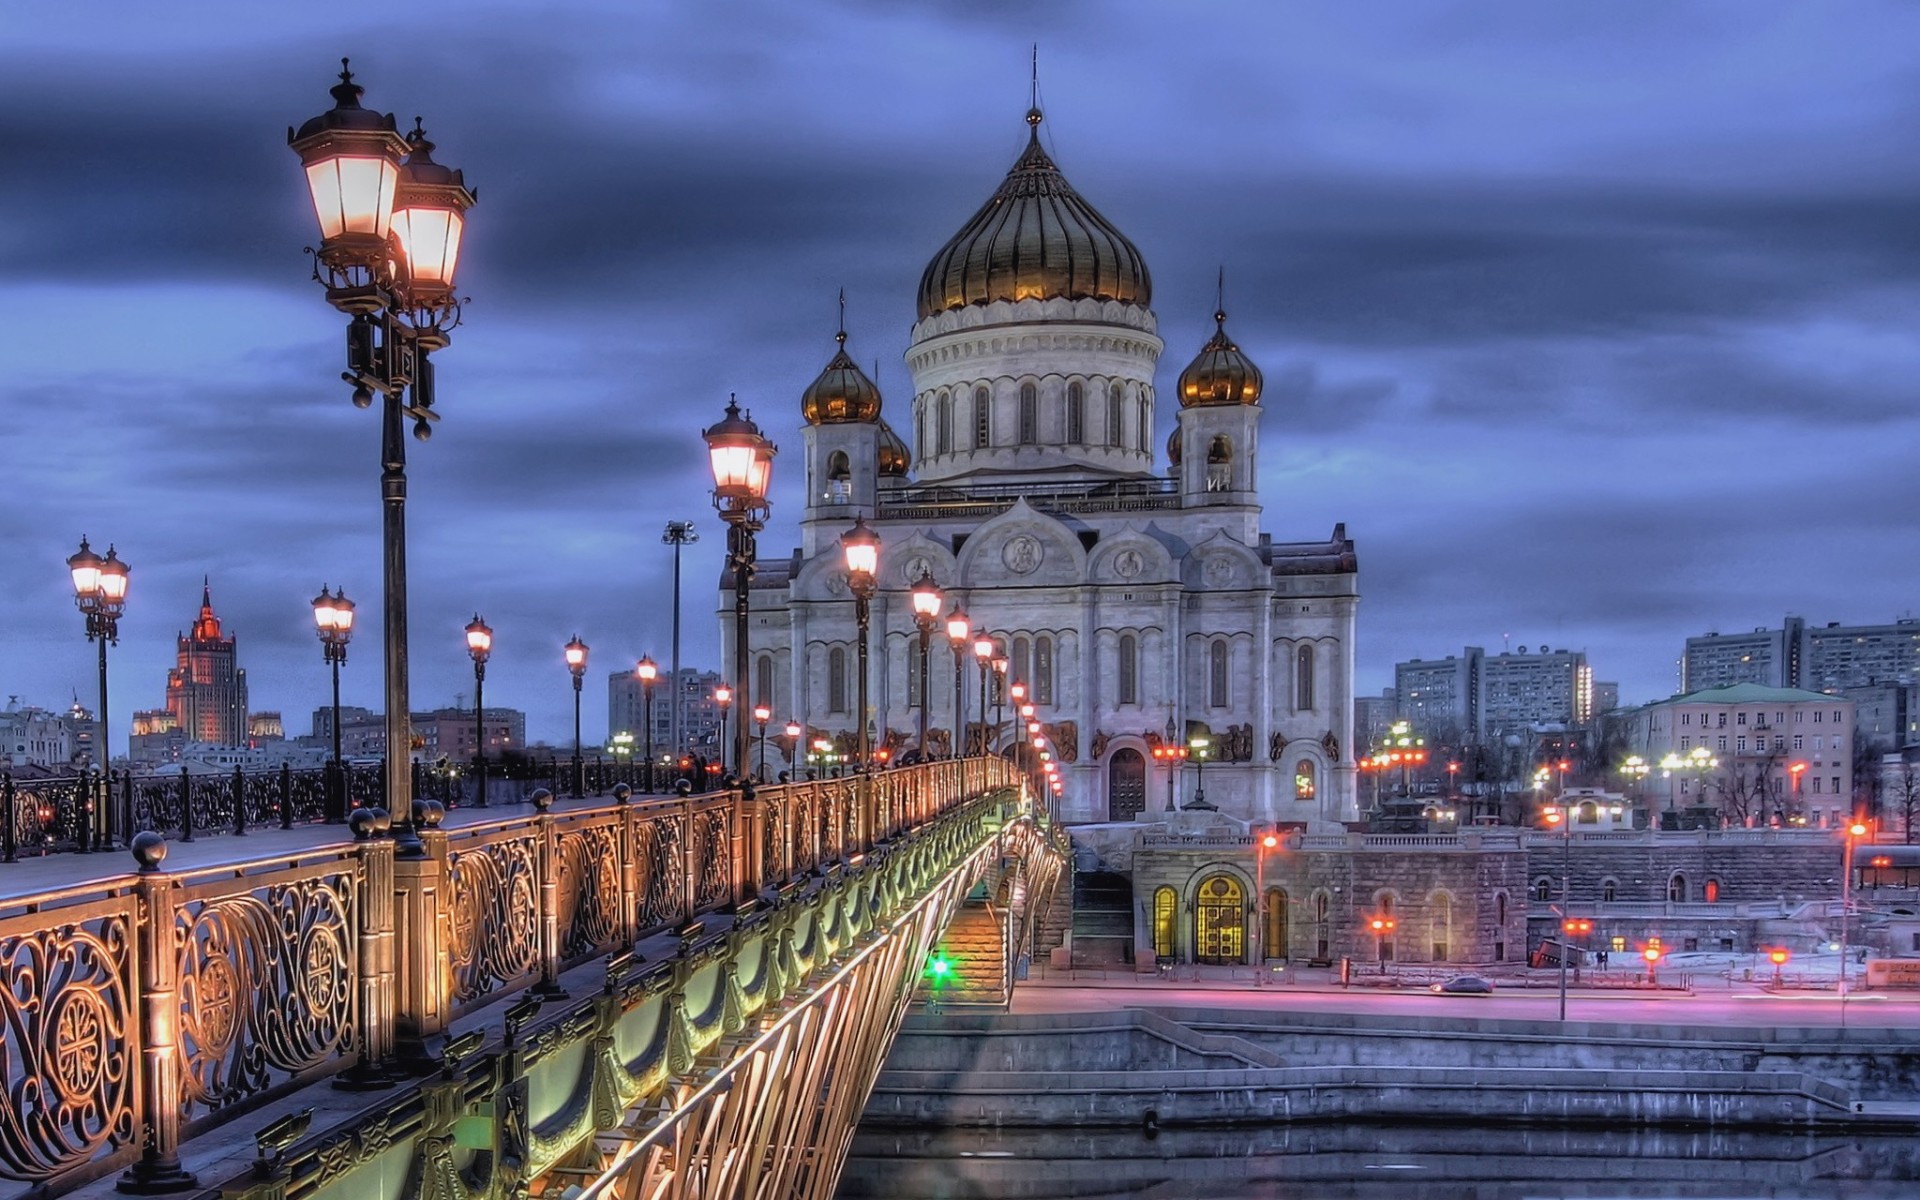 architecture, Building, Old building, Clouds, Russia, Long exposure, Evening, Lights, Church, Cathedral, Street light, HDR, Bridge, Moscow, City, Street, River Wallpaper